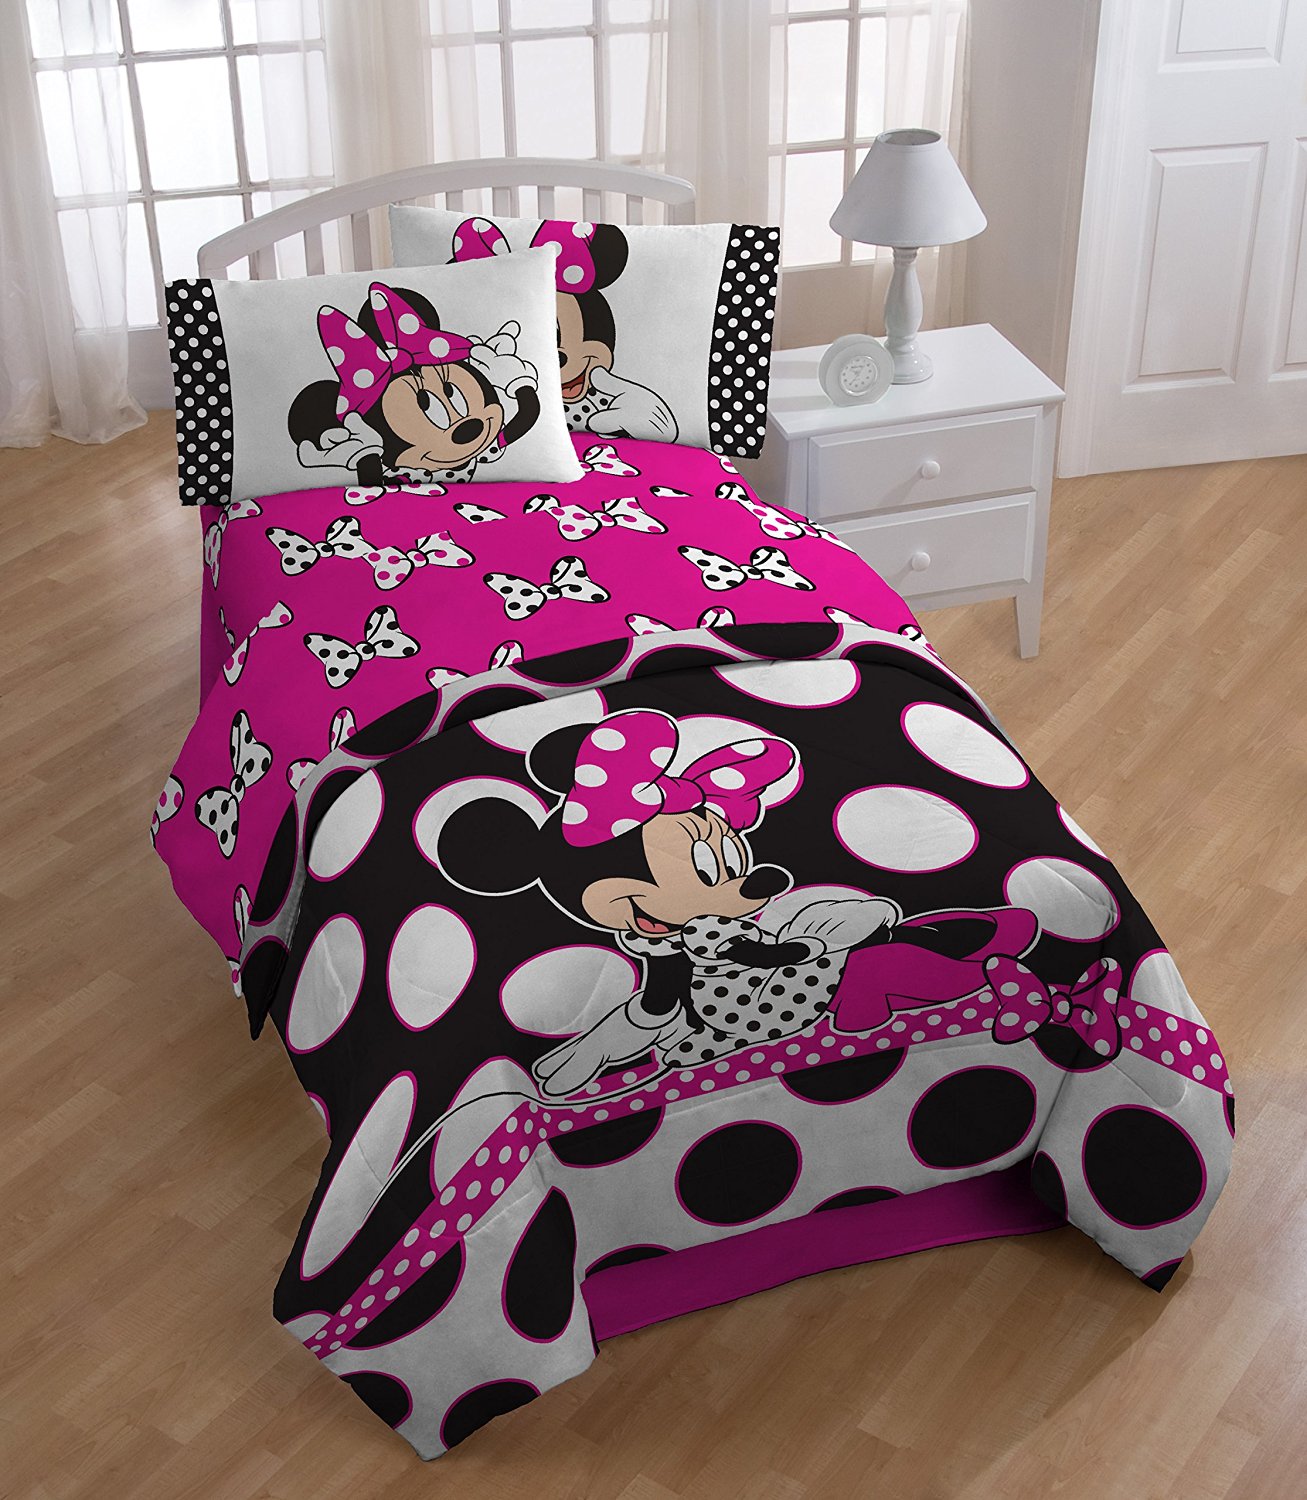 Rock the Dots with a Polka Dotted Minnie Mouse Bed Set